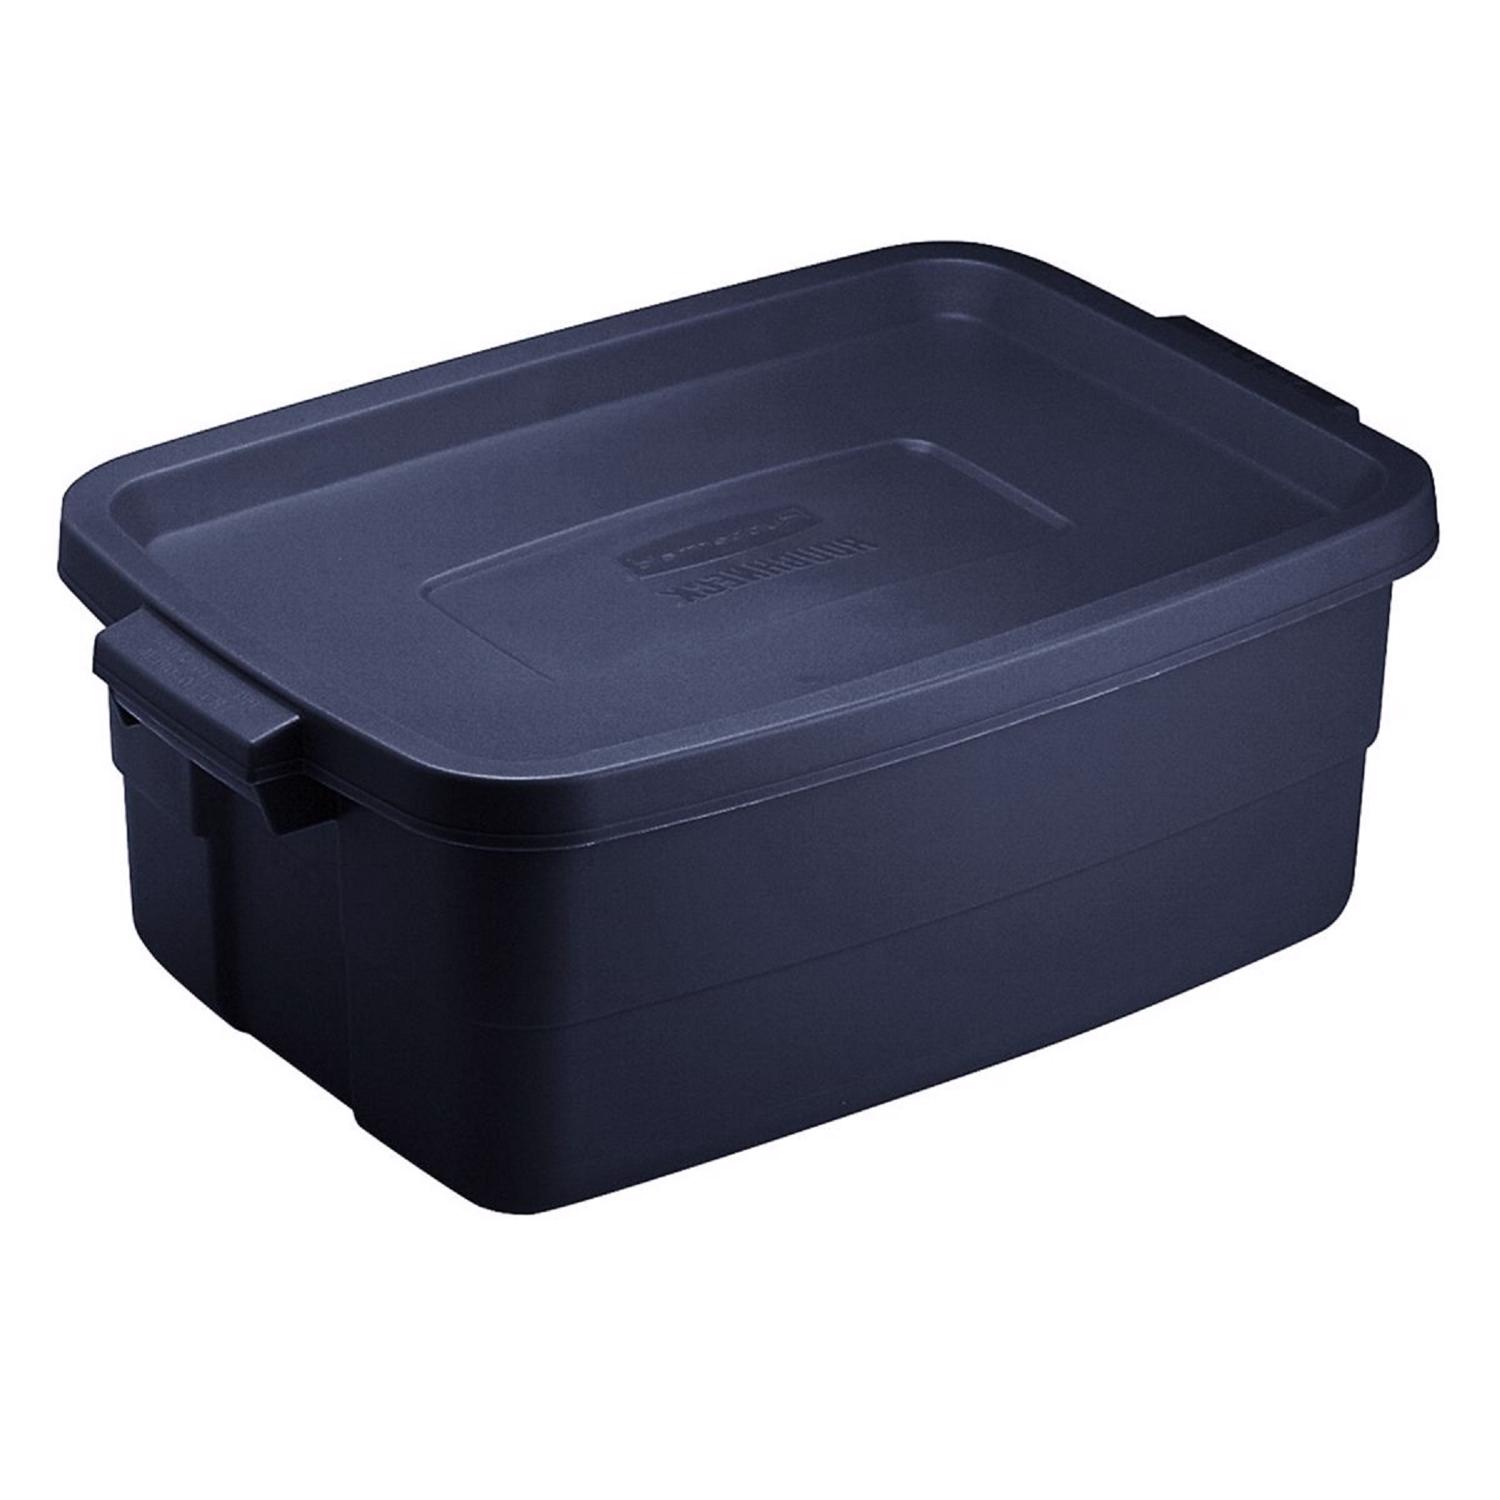 Rubbermaid Roughneck Tote 14 Gallon Storage Container, Heritage Blue (6  Pack), 1 Piece - Ralphs